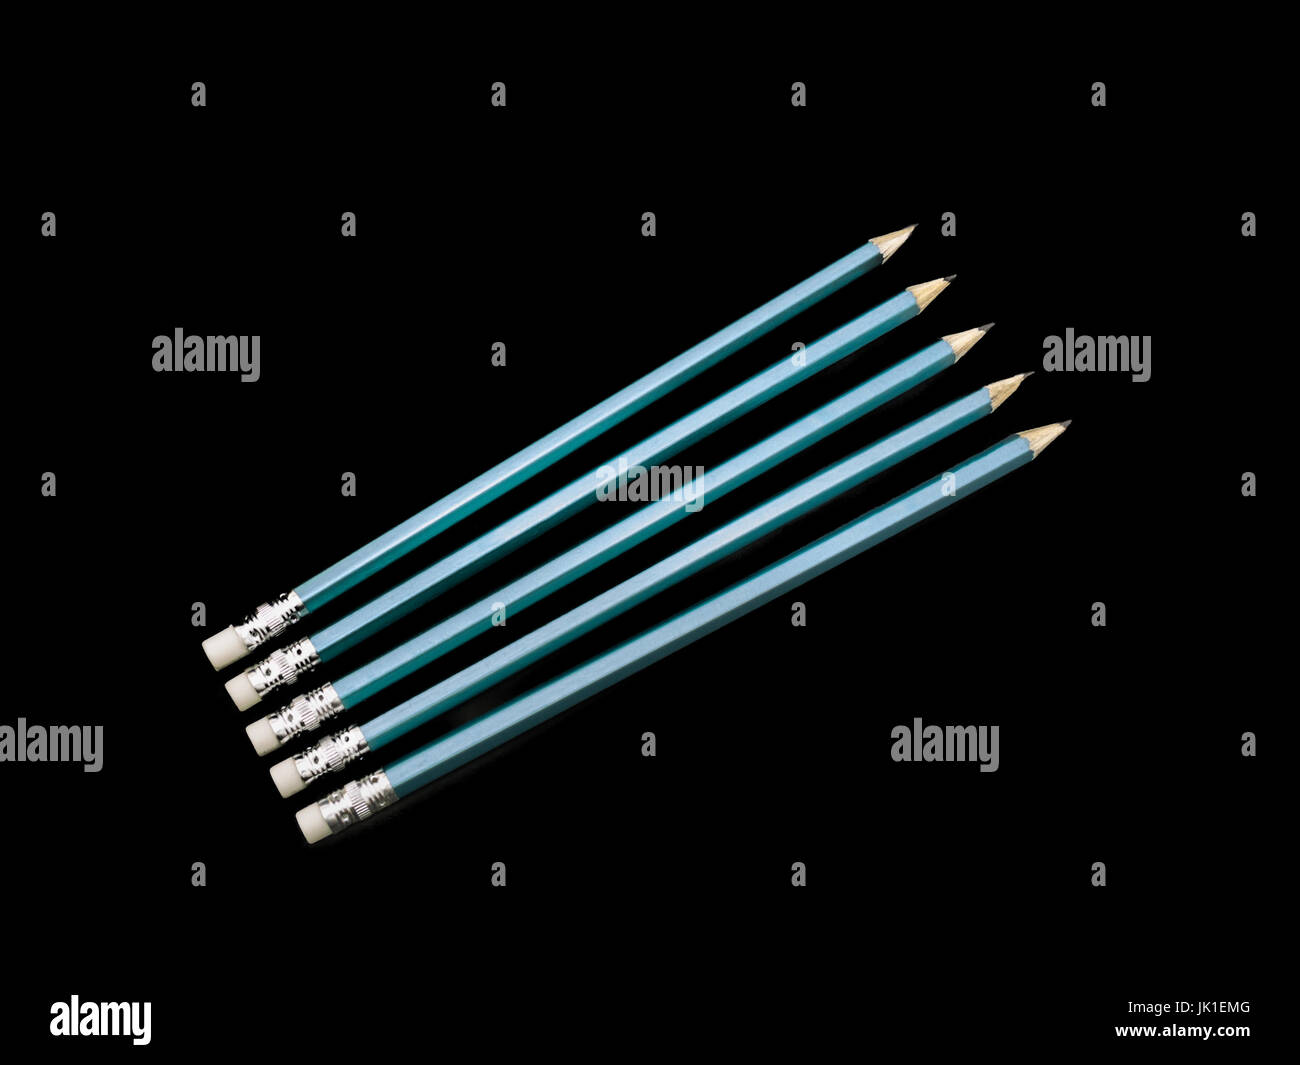 Five Pencils metalic blue and diagonaly positioned on a black background. Stock Photo